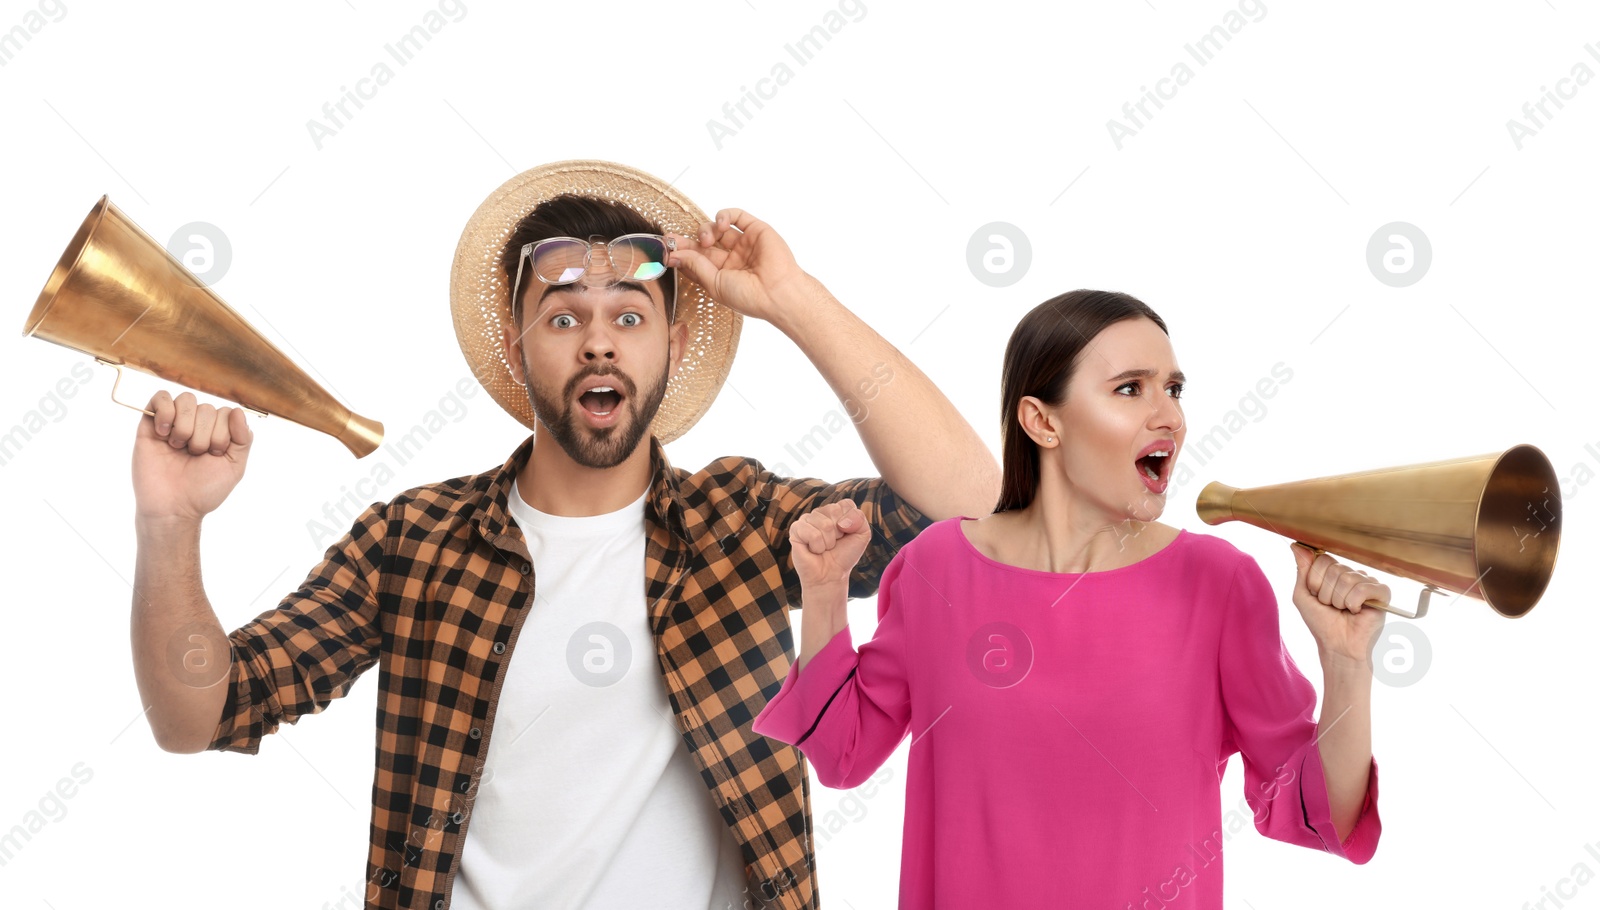 Image of Collage of people with megaphones on white background